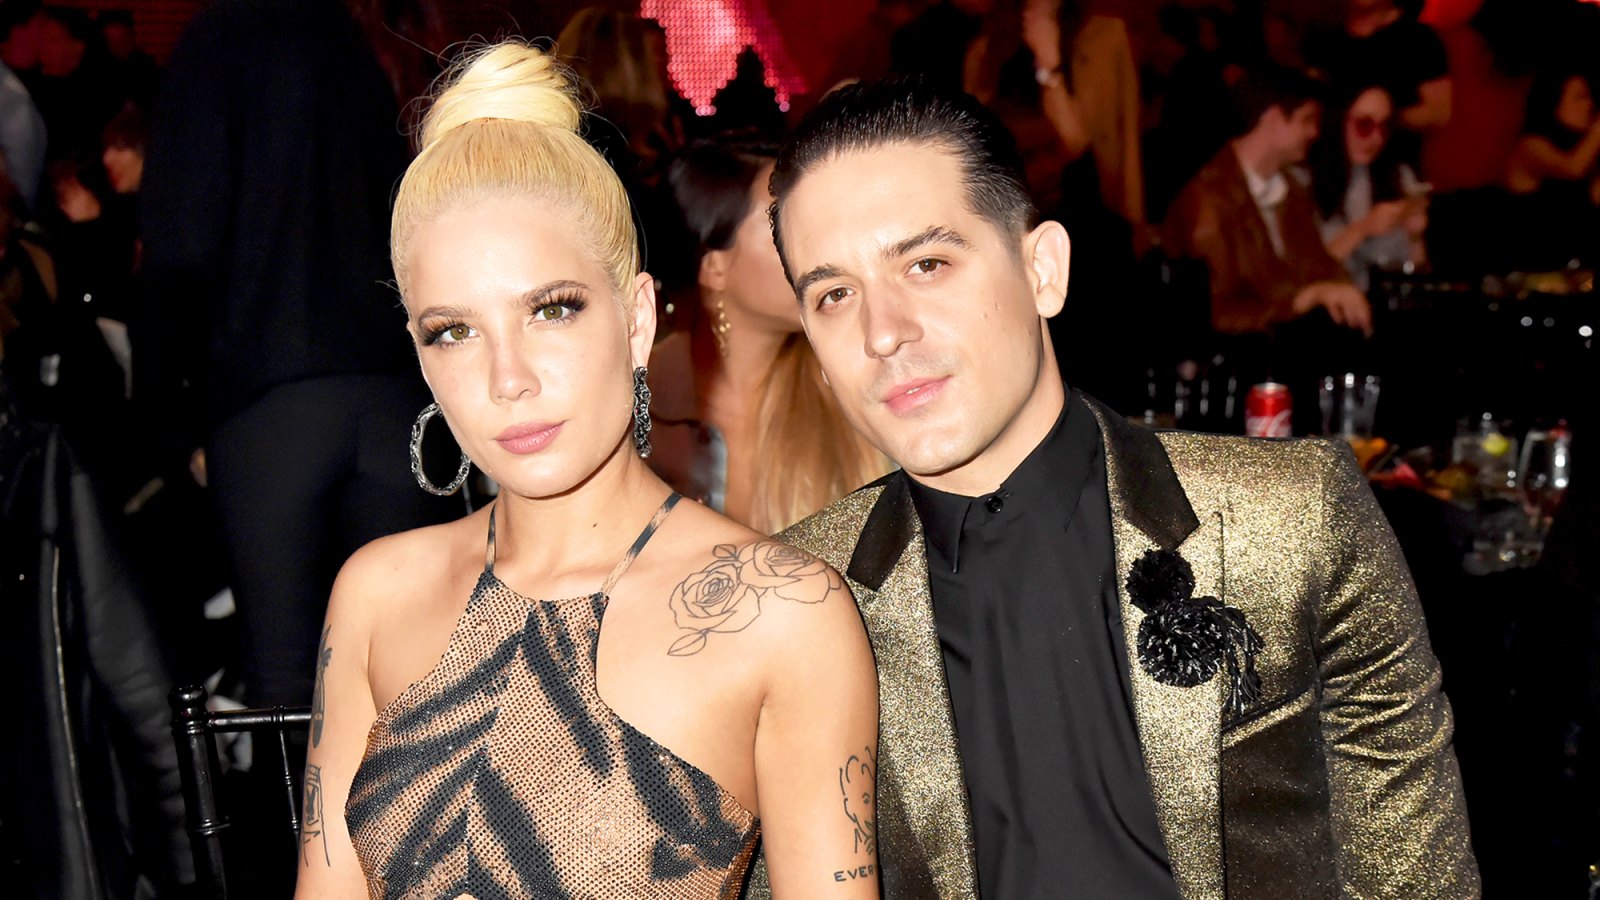 Halsey and G-Eazy attend the 2018 iHeartRadio Music Awards at The Forum on in Inglewood, California.